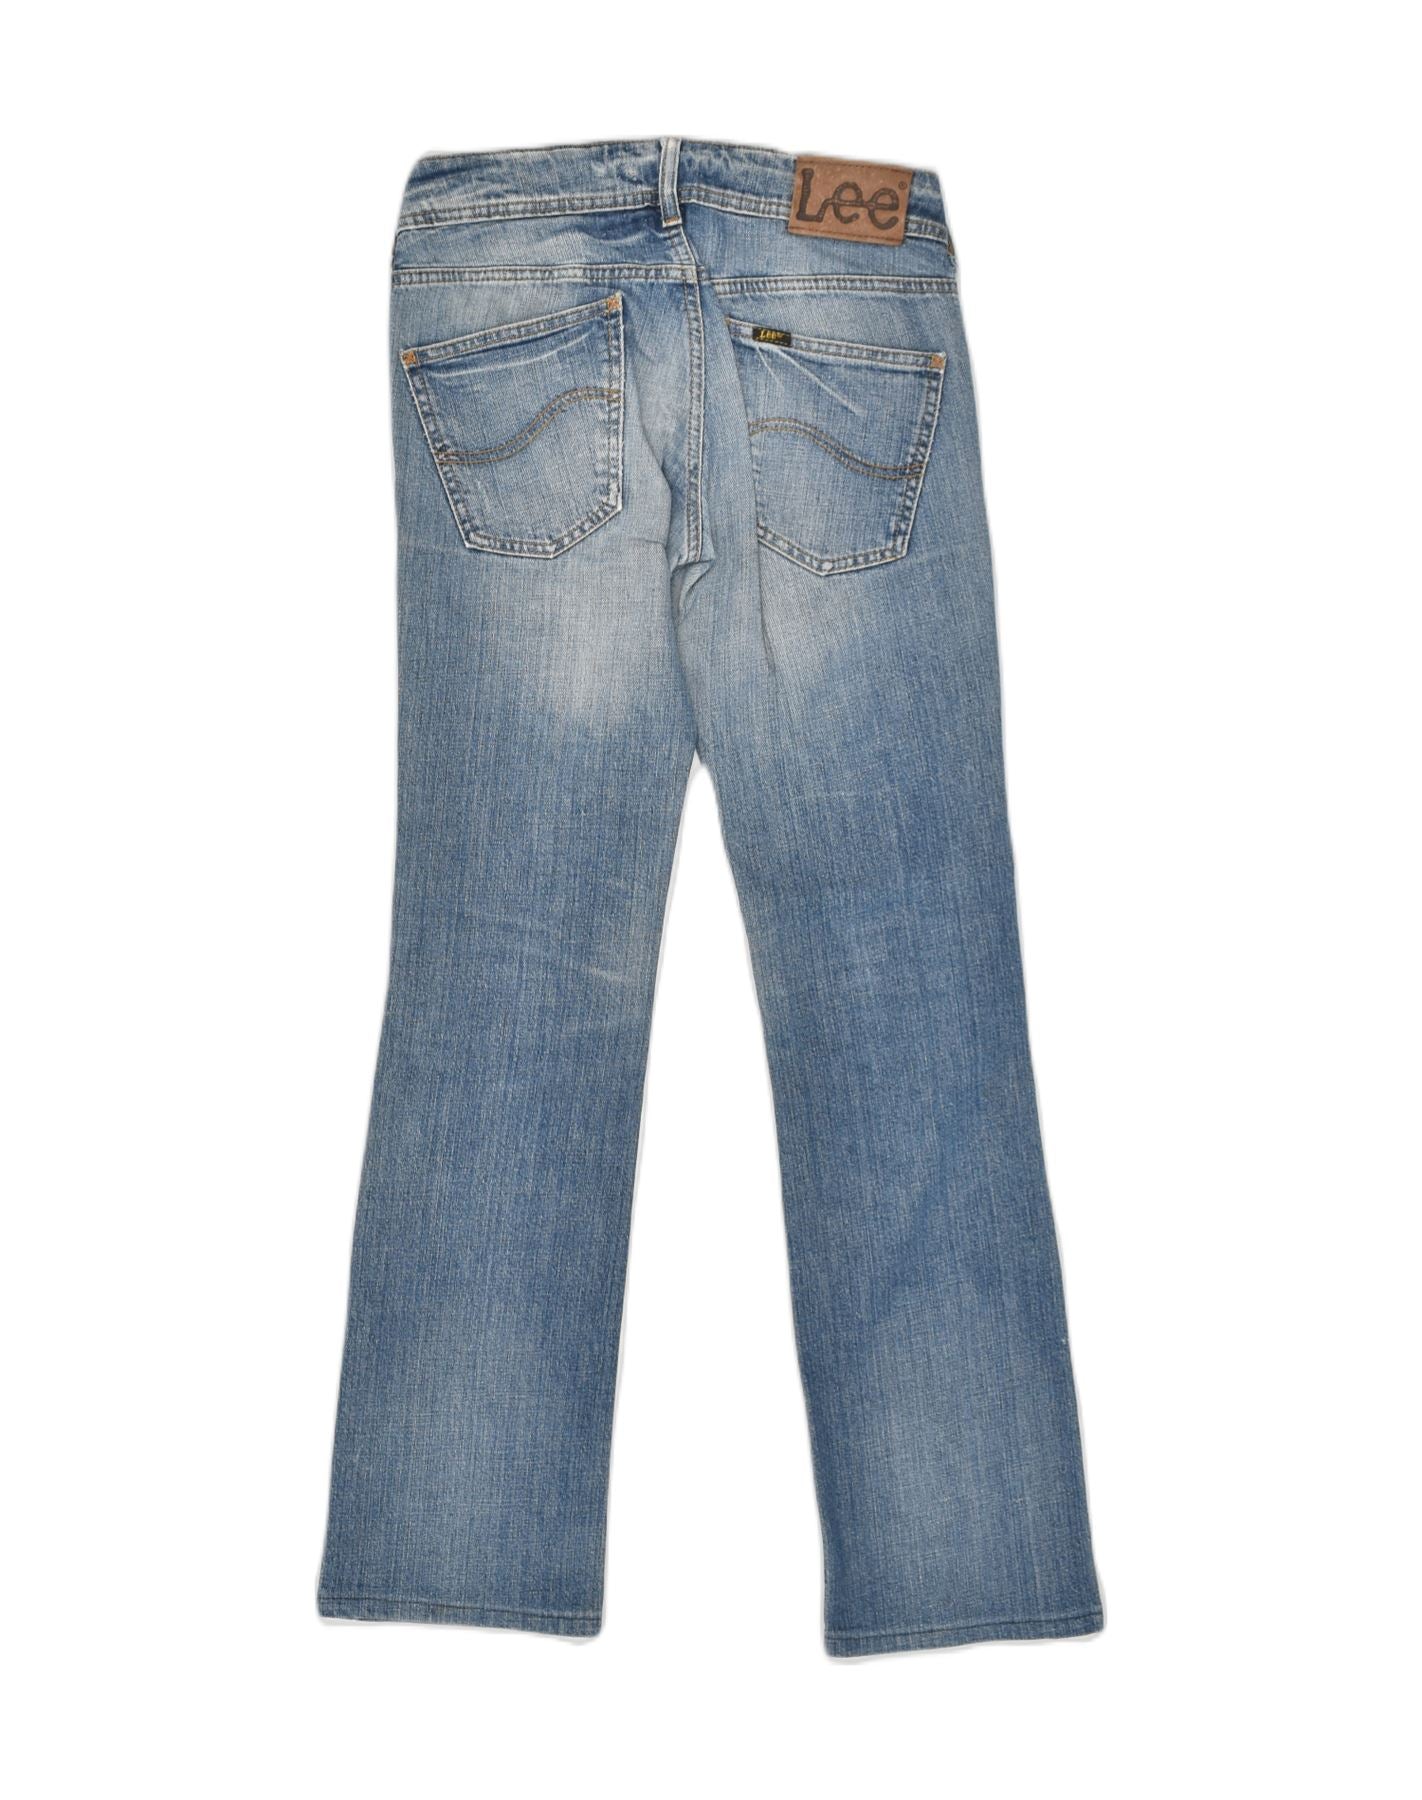 HOLLISTER Womens Skinny Jeans W26 L33 Blue Cotton, Vintage & Second-Hand  Clothing Online